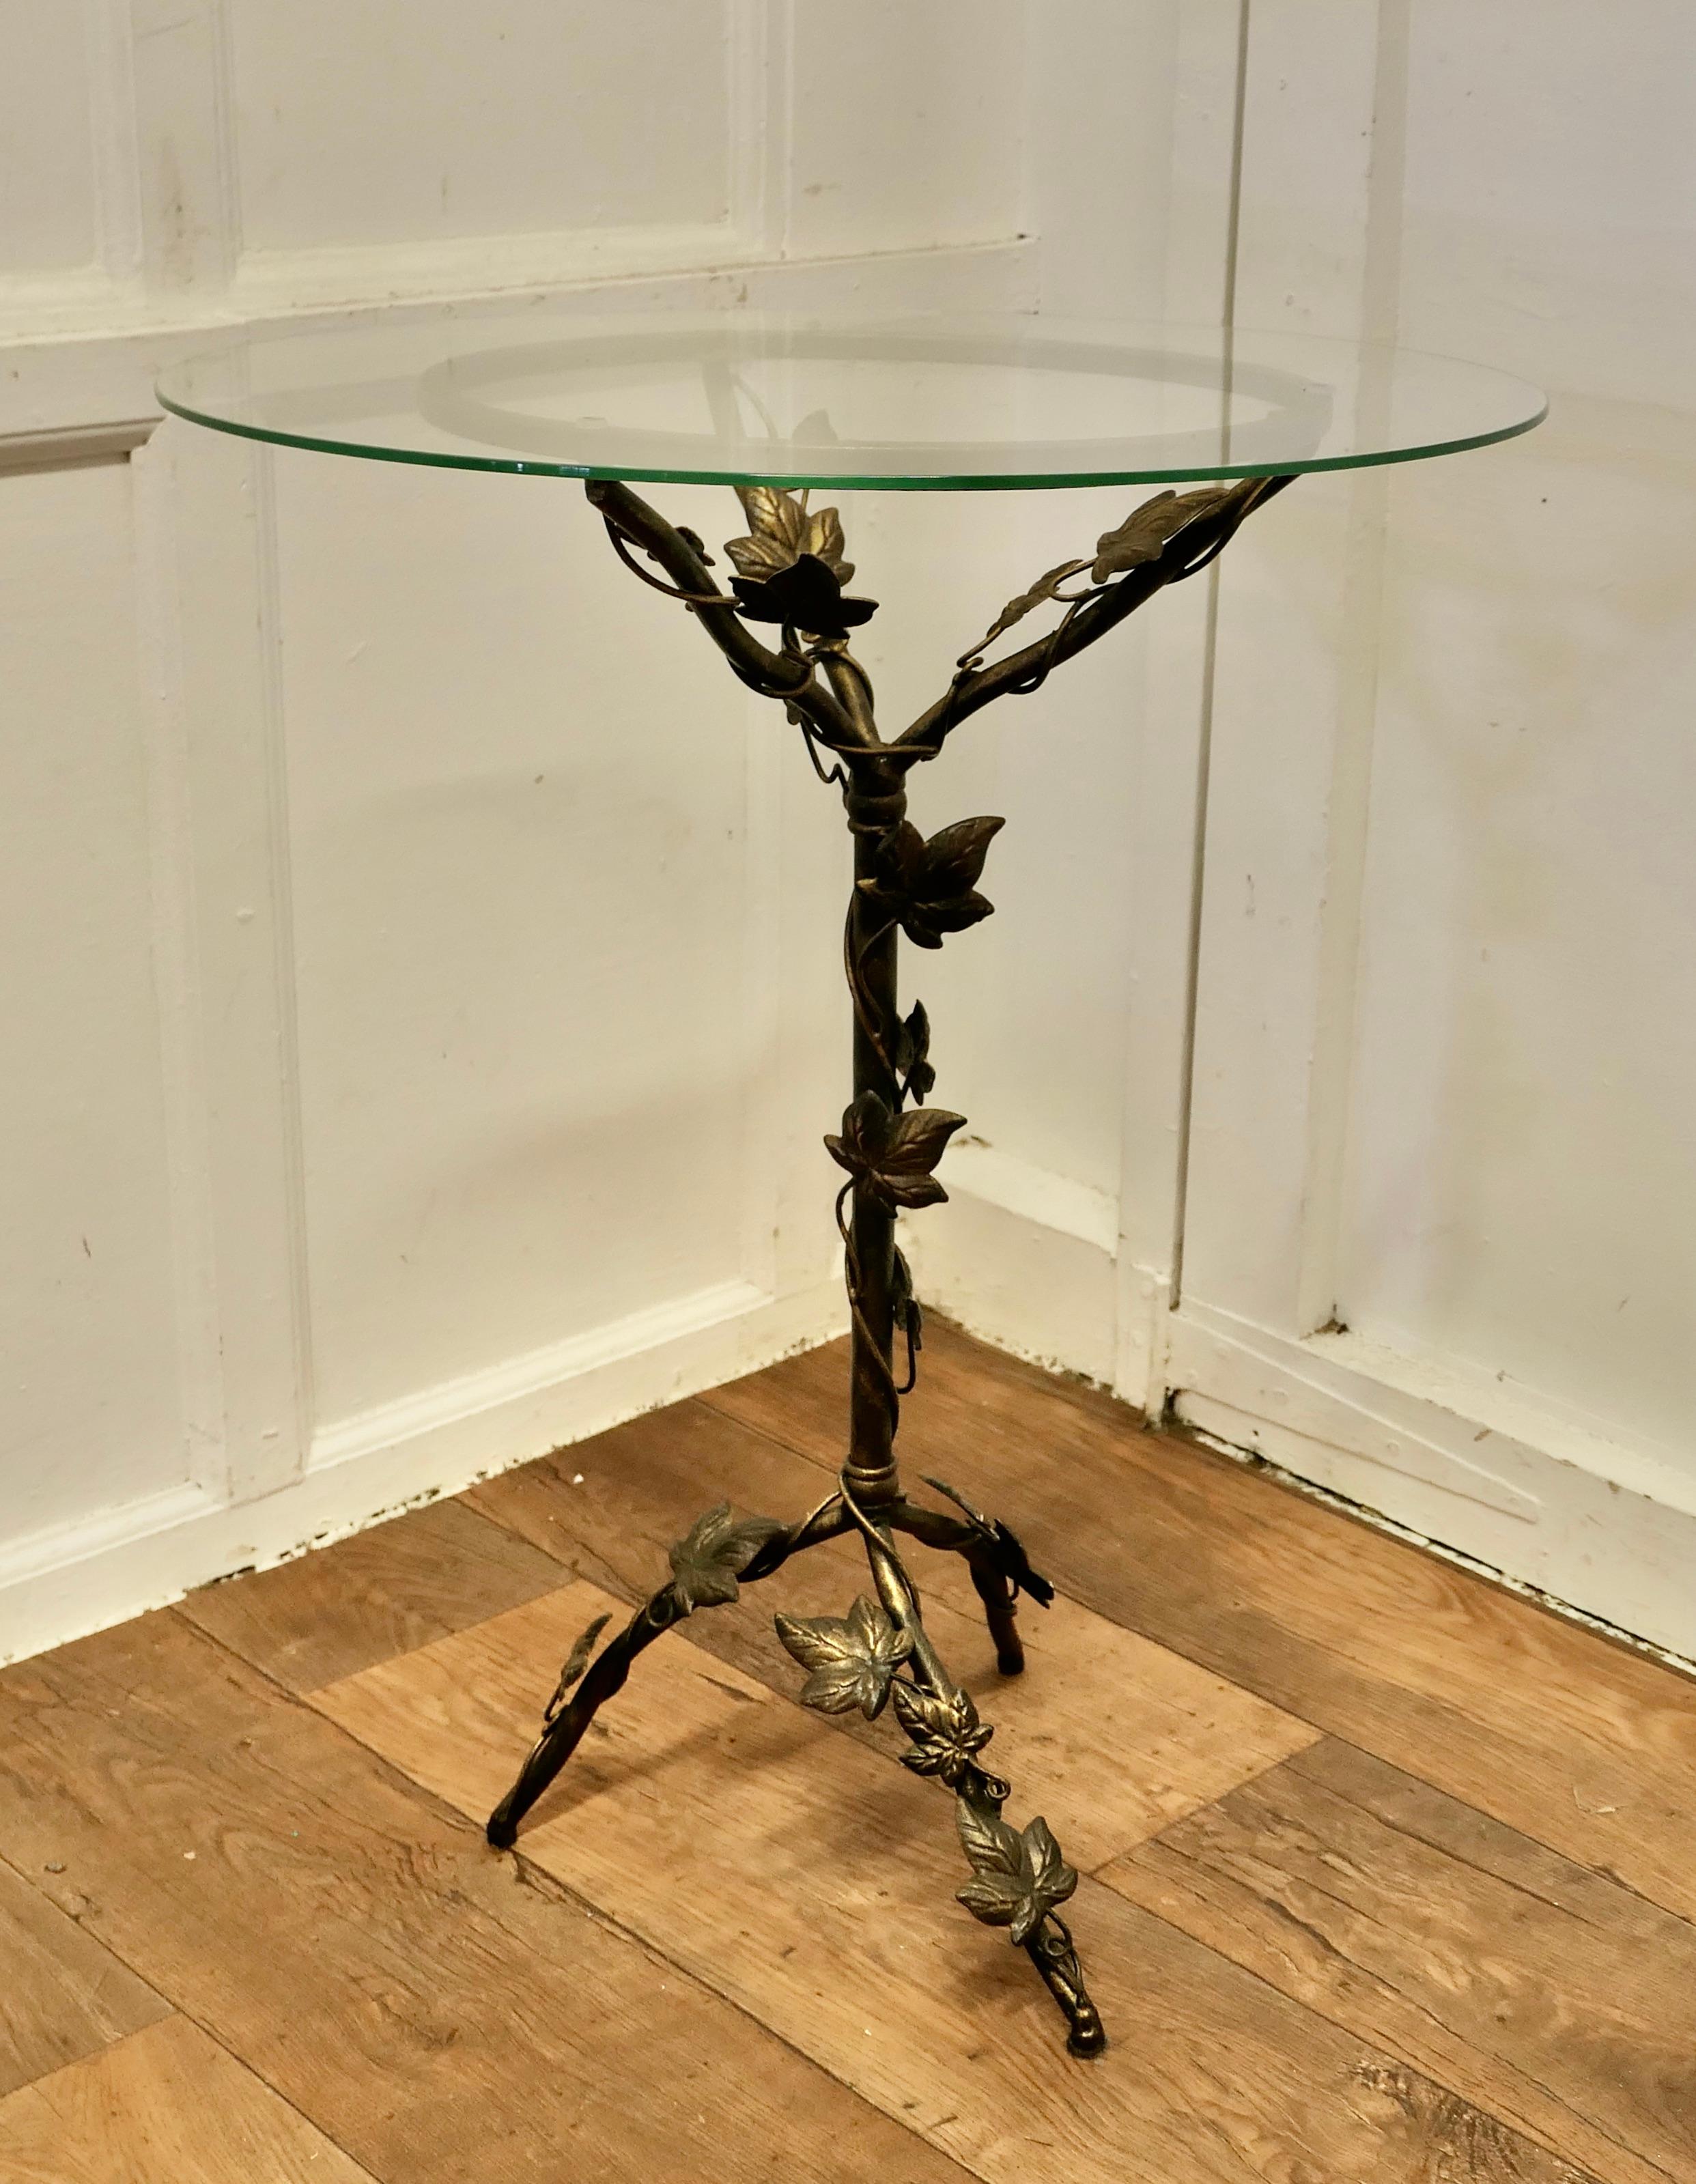 Petite French Toleware and Glass Wine Table

This lovely table stands on a three footed metal base which has an attractive twisted vine decoration on a centre leg
The thick round glass top gives a good view of the guilt toleware decoration 
The